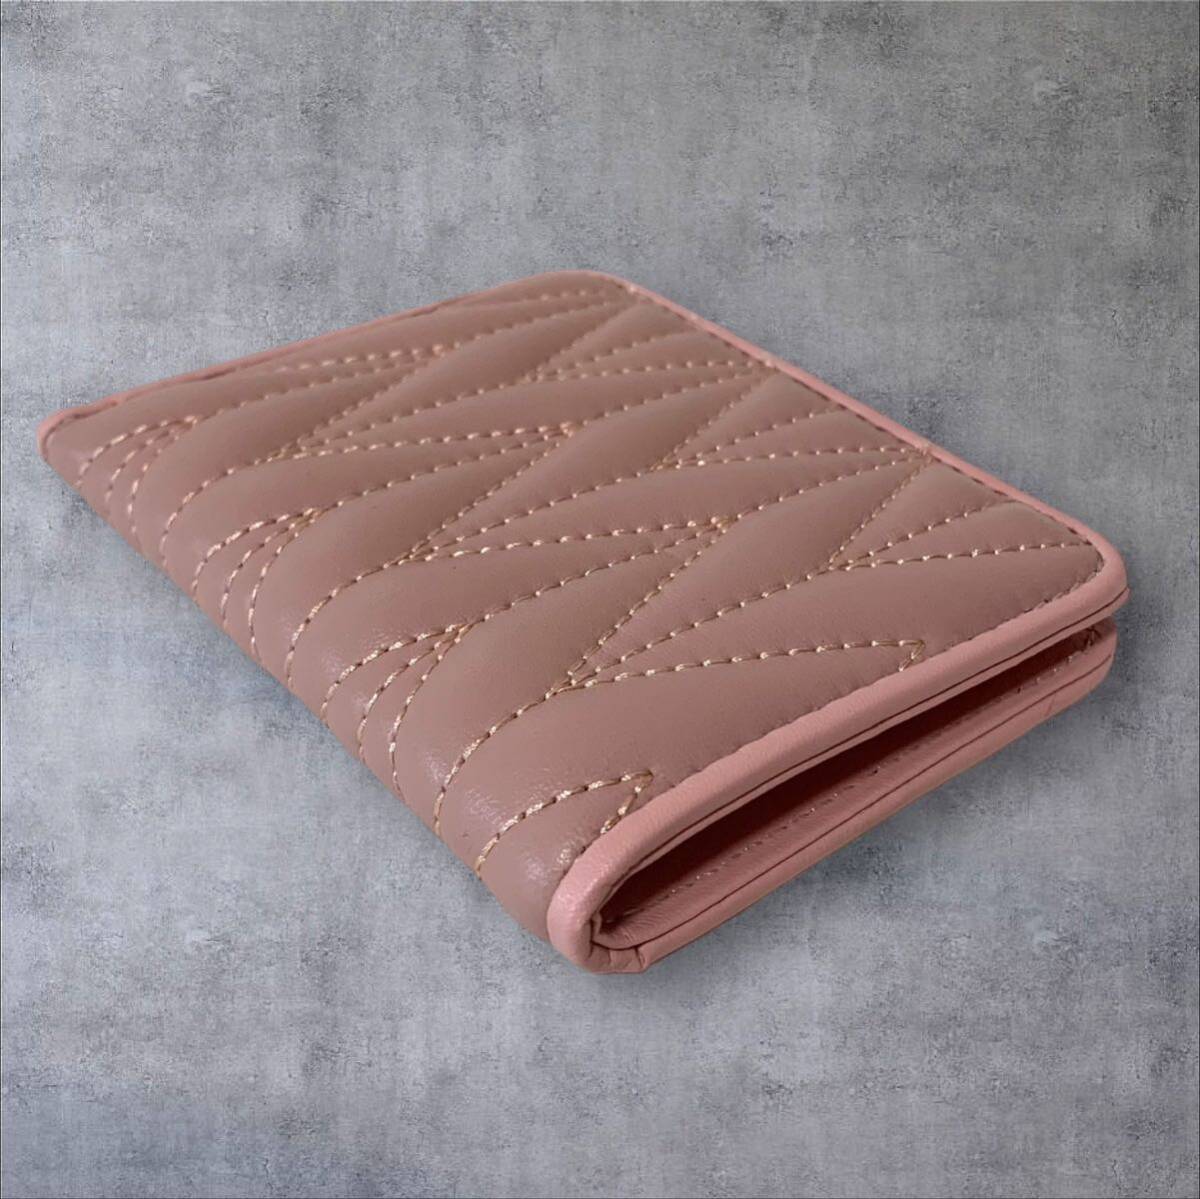  high class ram leather purse # soft sheep leather made compact wallet # pink 